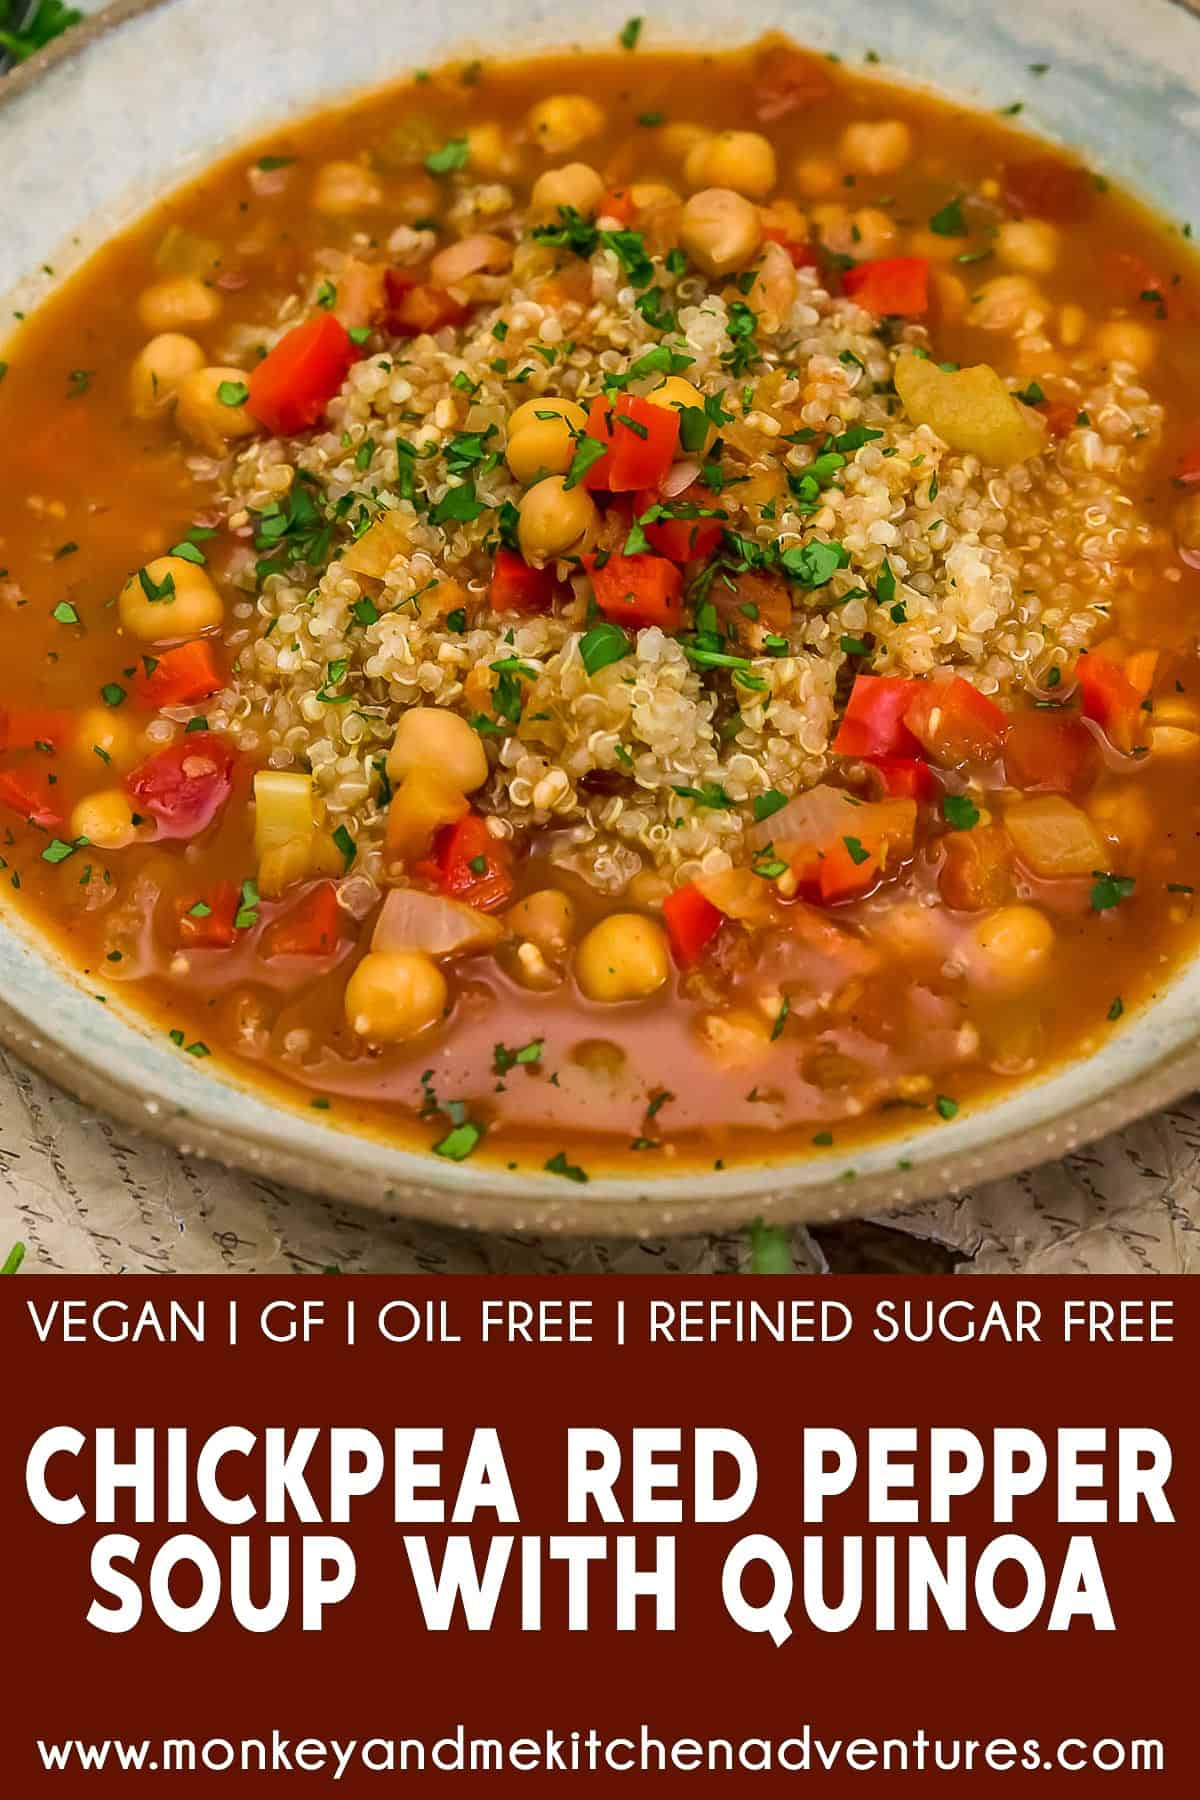 Chickpea Red Pepper Soup with Quinoa with text description